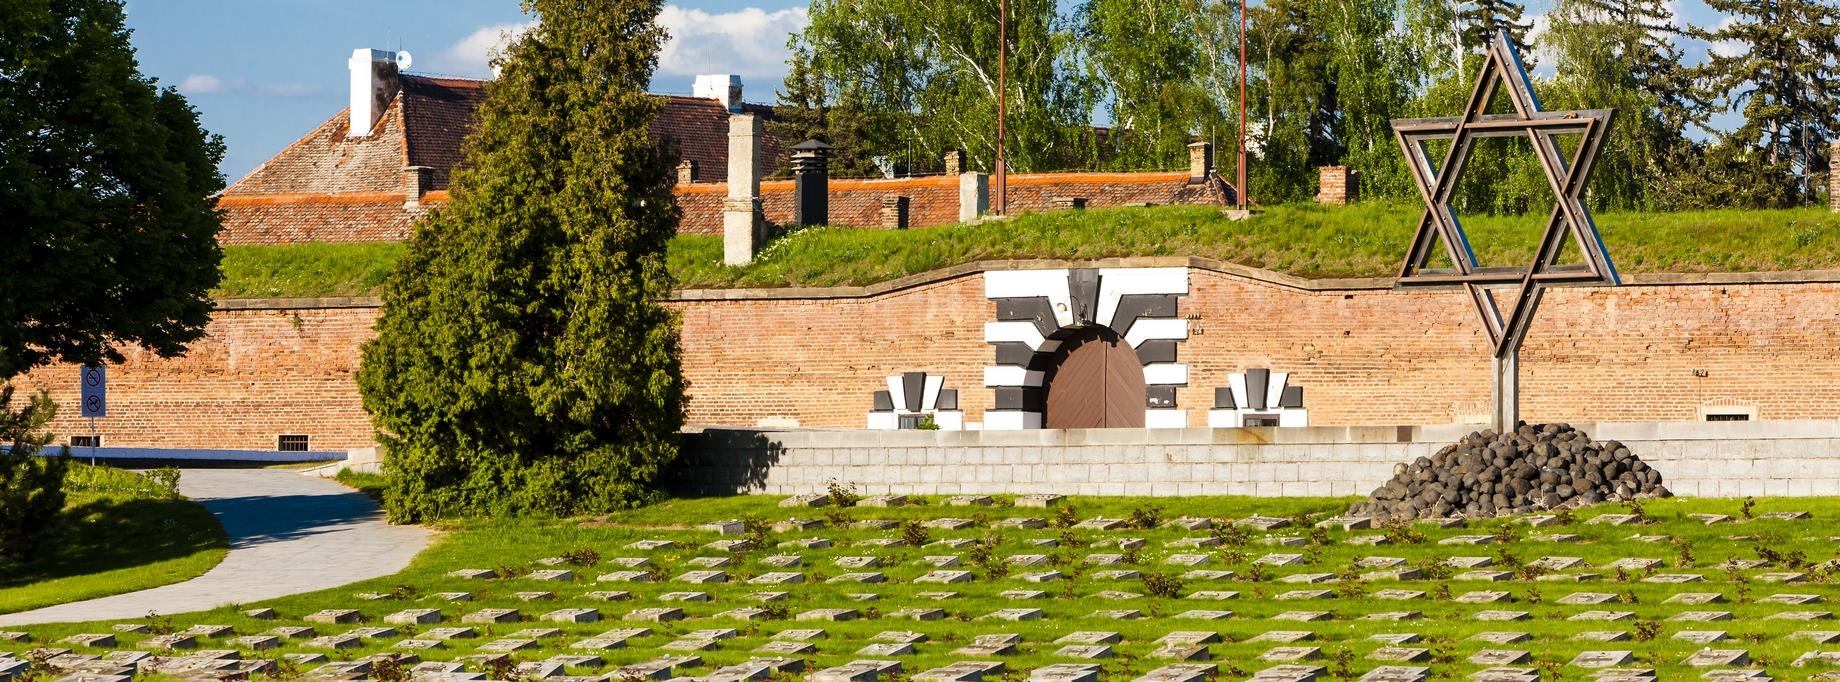 Terezin Day Trip from Prague with Tickets